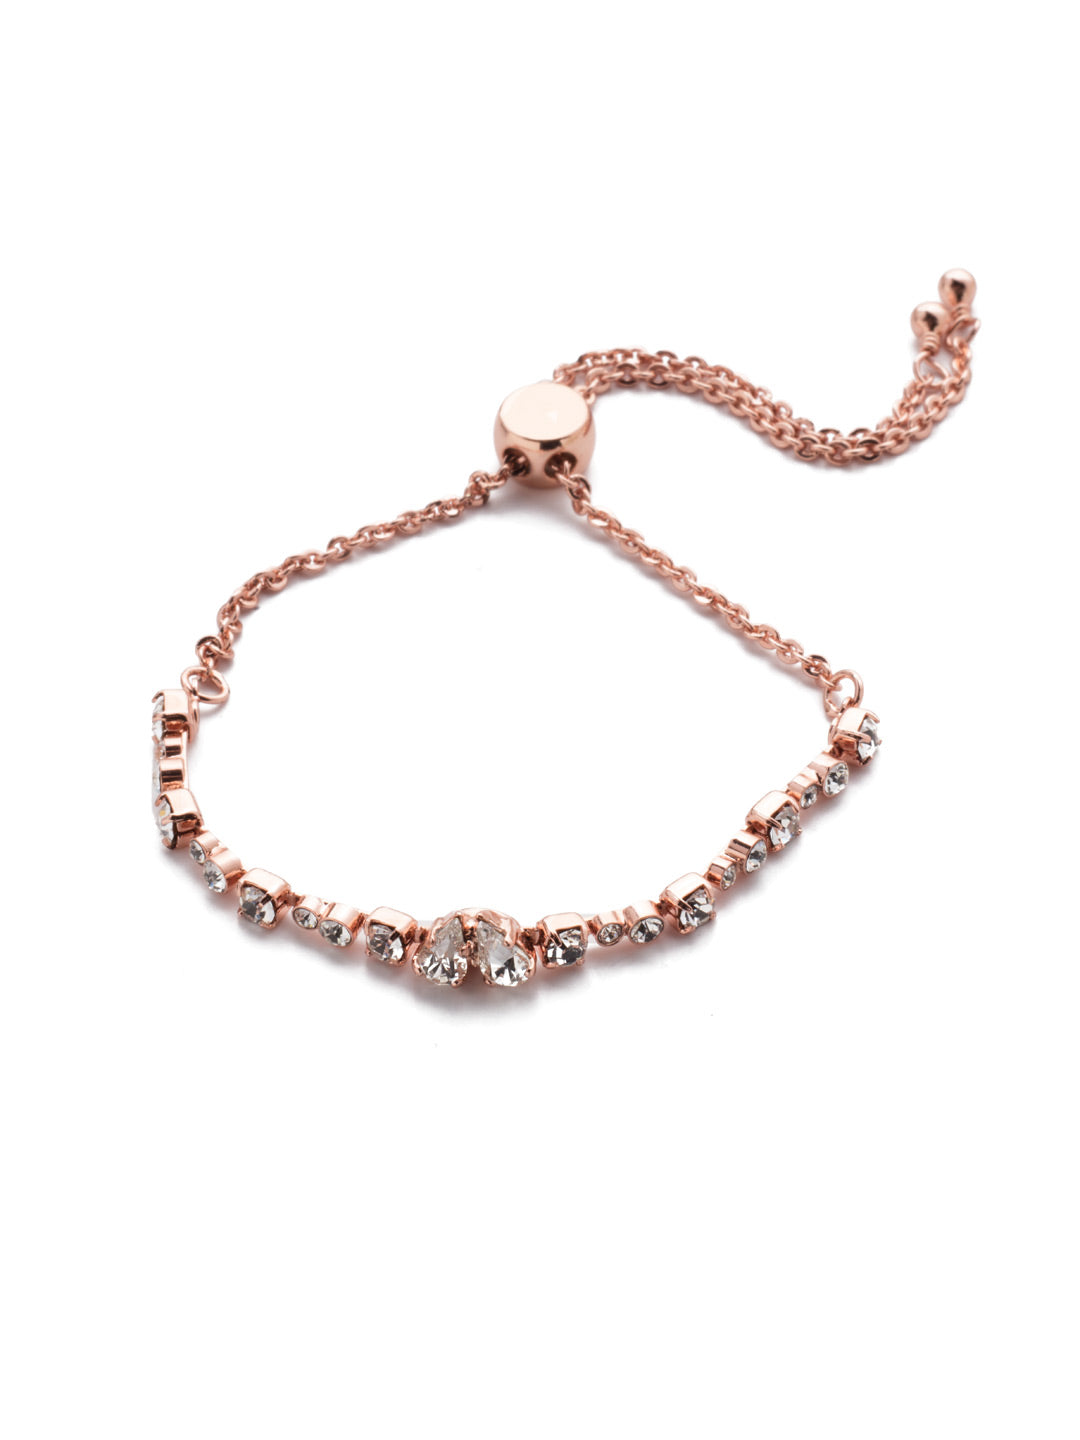 Waverly Slider Bracelet - BER7RGCRY - <p>Slip on the Waverly Slider Bracelet when you want to sparkle all day long. Circlular crystals line this piece with a heart-shape at its center. From Sorrelli's Crystal collection in our Rose Gold-tone finish.</p>